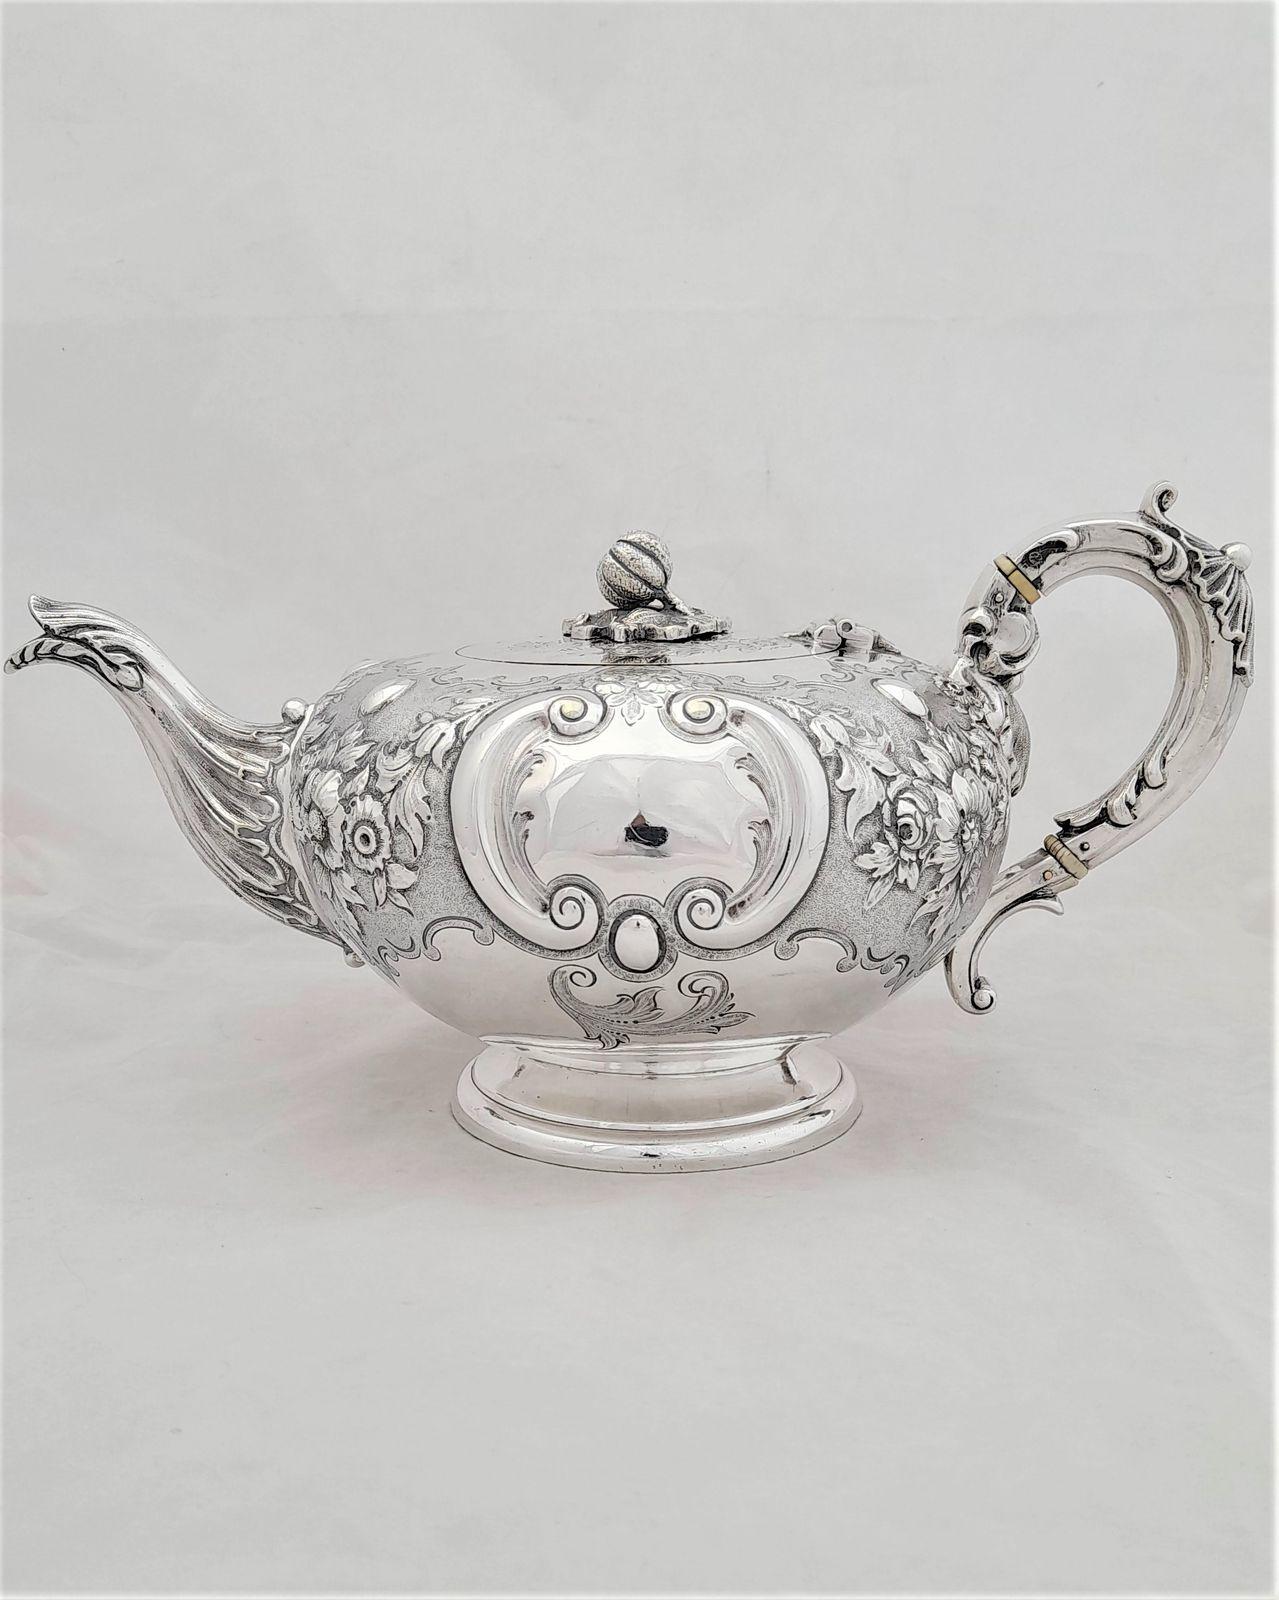 An antique early Victorian Mappin & Webb silver plated melon shaped tea pot with repousse floral decoration acanthus scroll spout and handle and cast melon shape knob on the lid. Capacity 2.5 pints, date circa 1865.